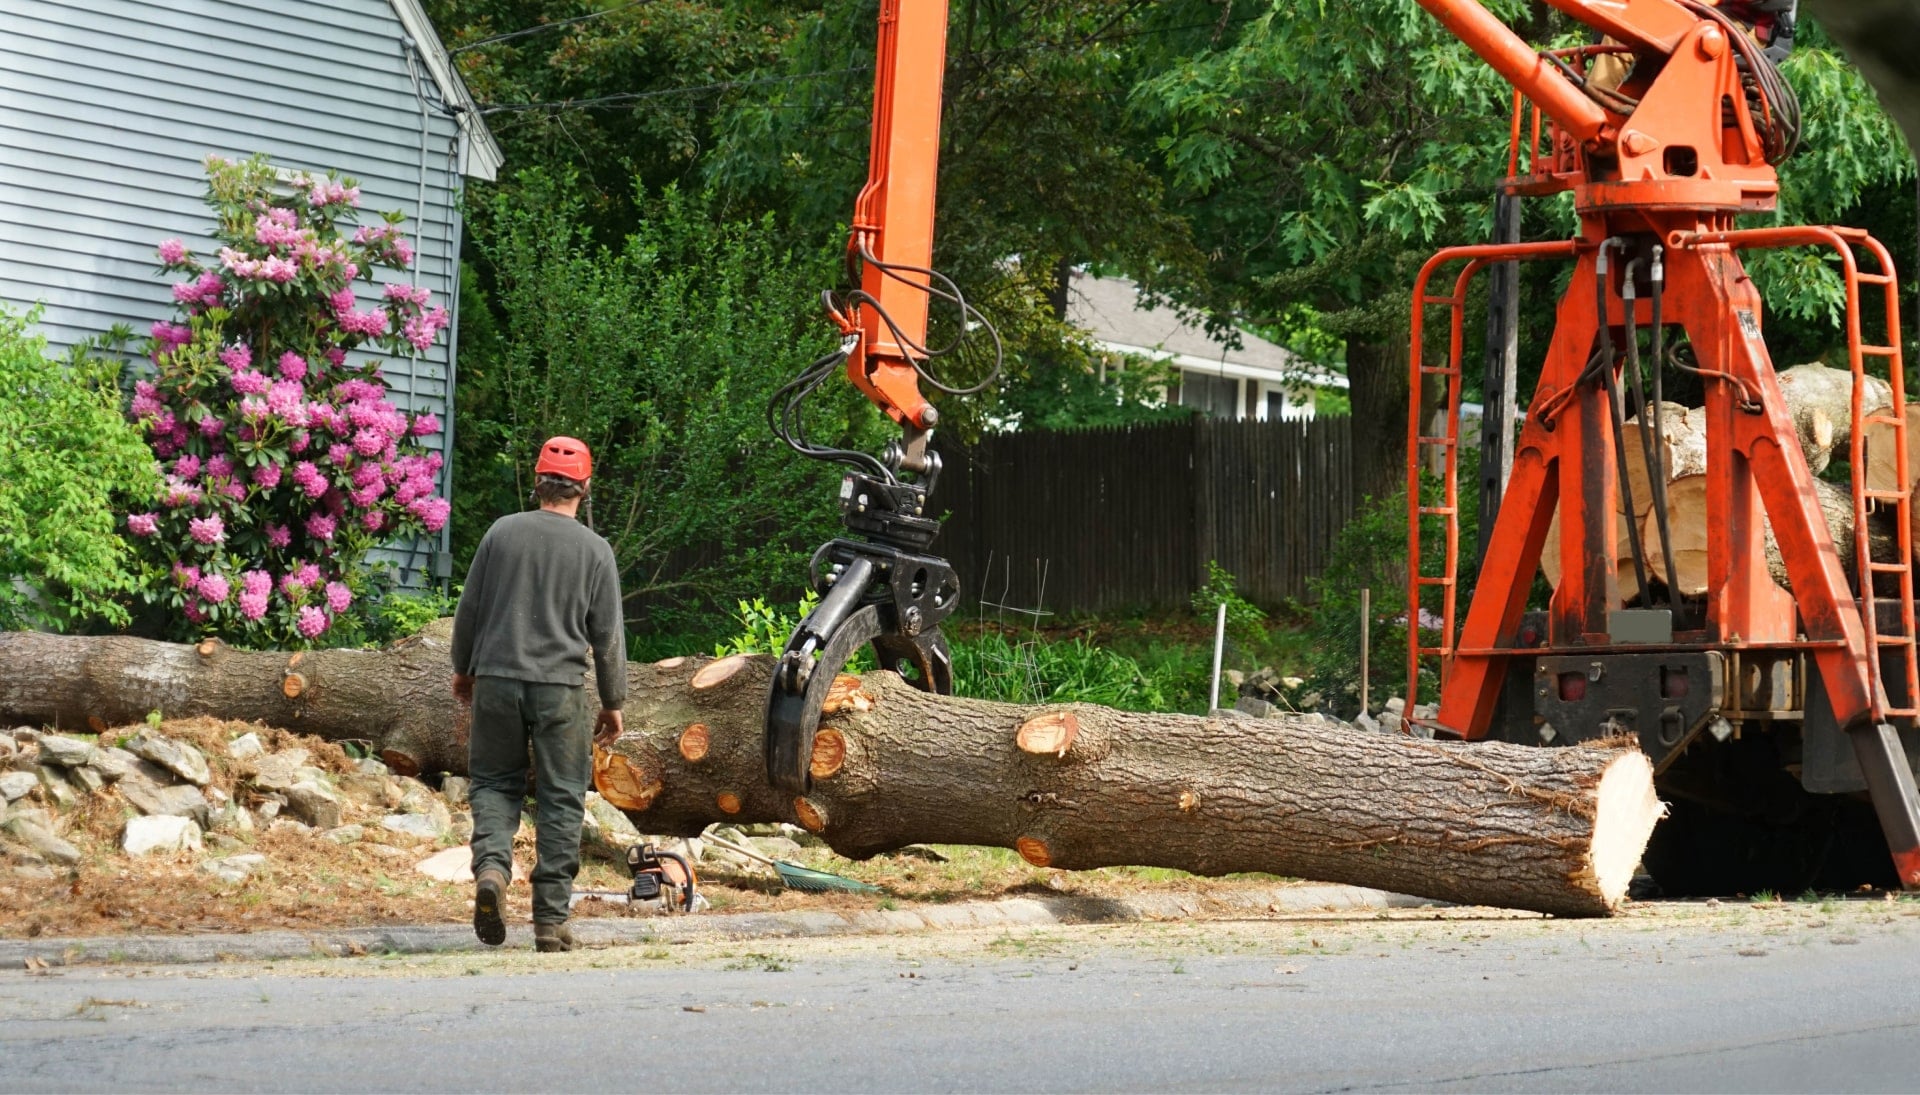 Local partner for Tree removal services in Long Island